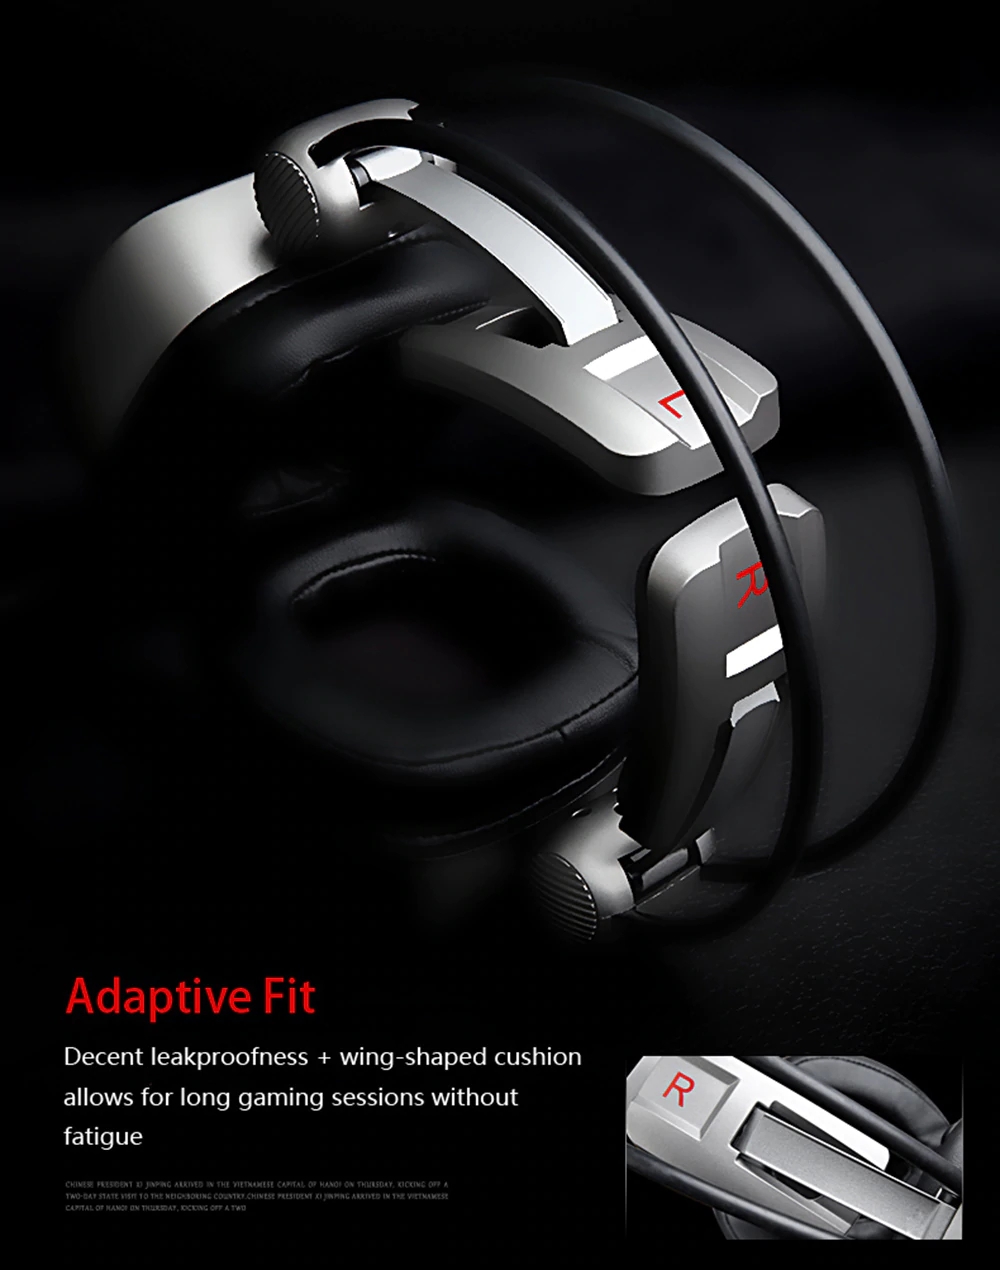 Xiberia S21 USB Wired 7.1 Surround Sound Stereo Gaming Headphone Headset with Mic 6